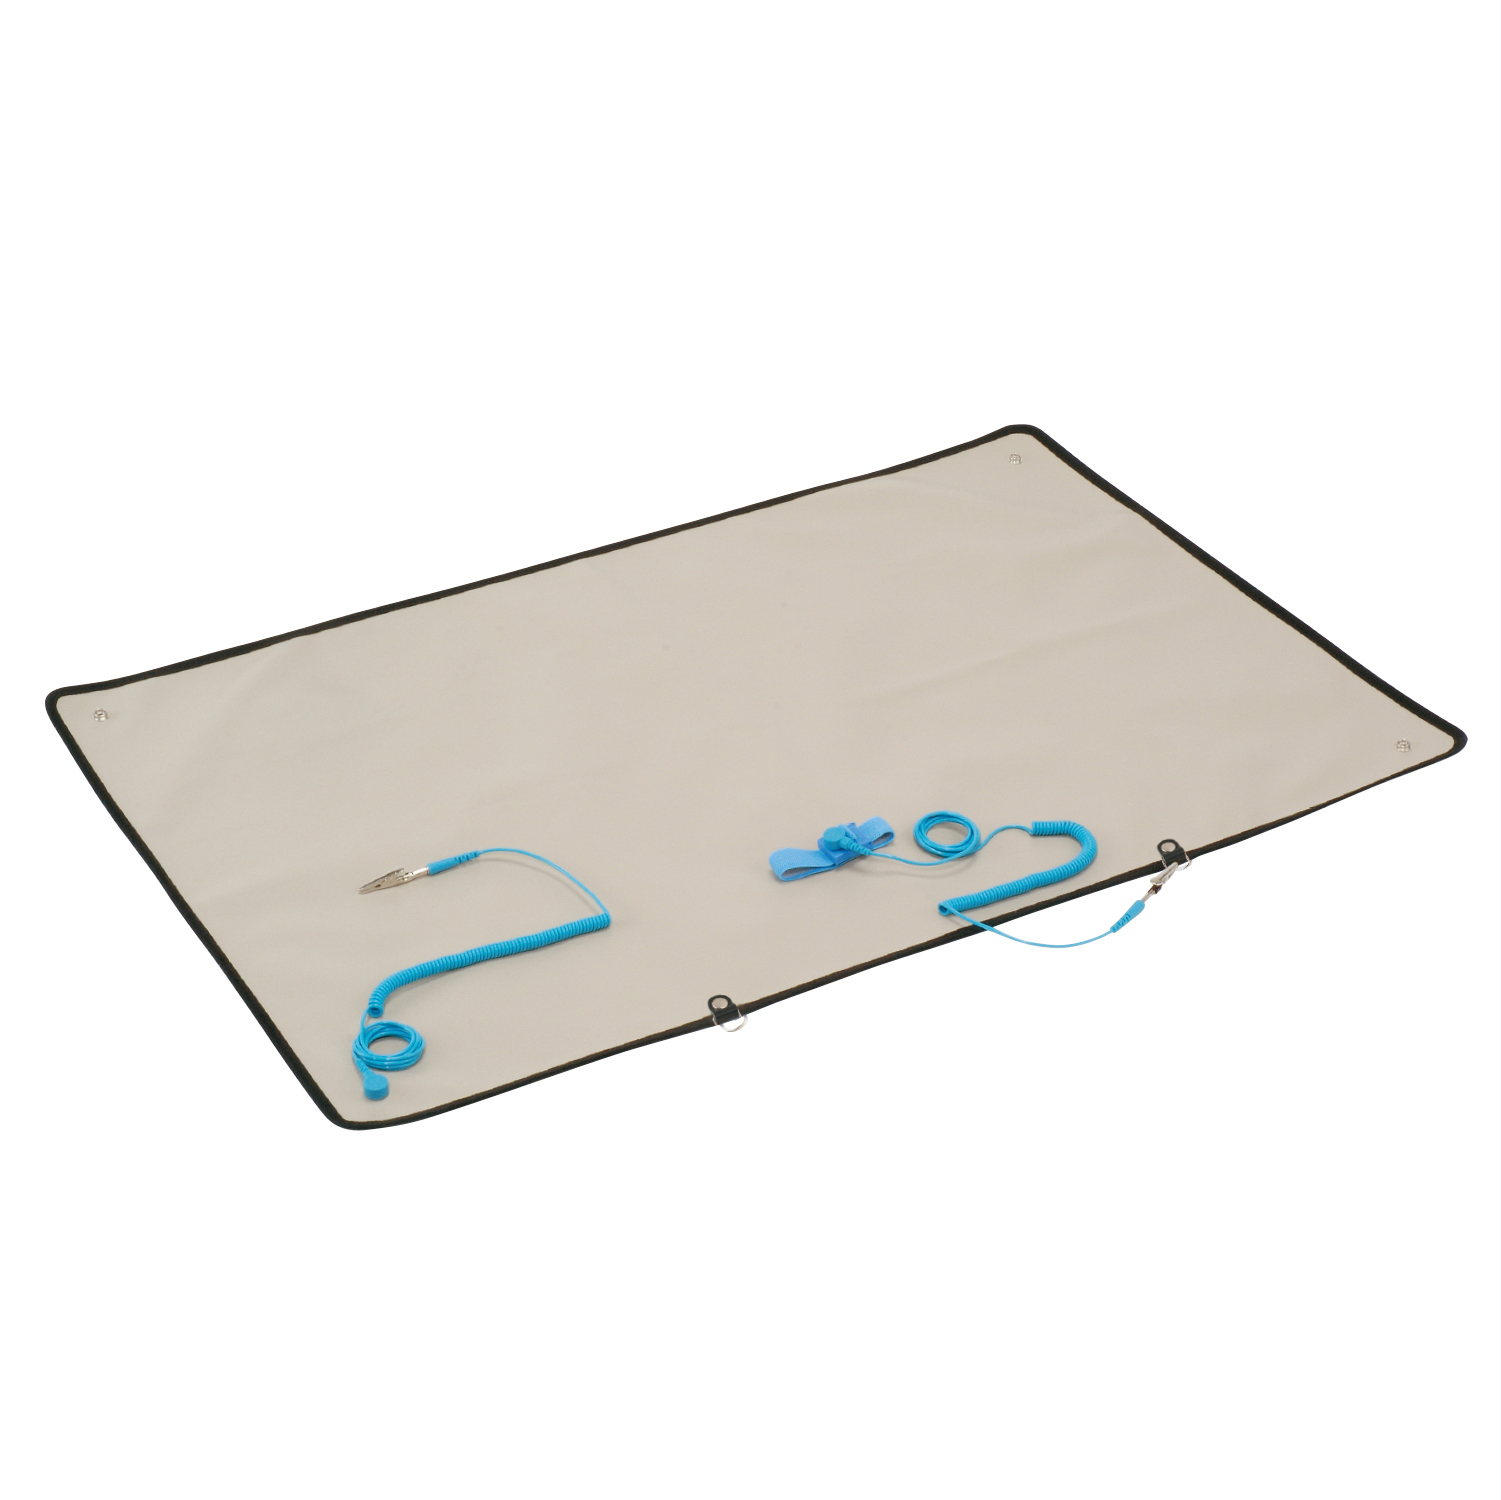 Antistatic Work Mat for Maintenance Thickness 0.7 mm (ENGINEER)